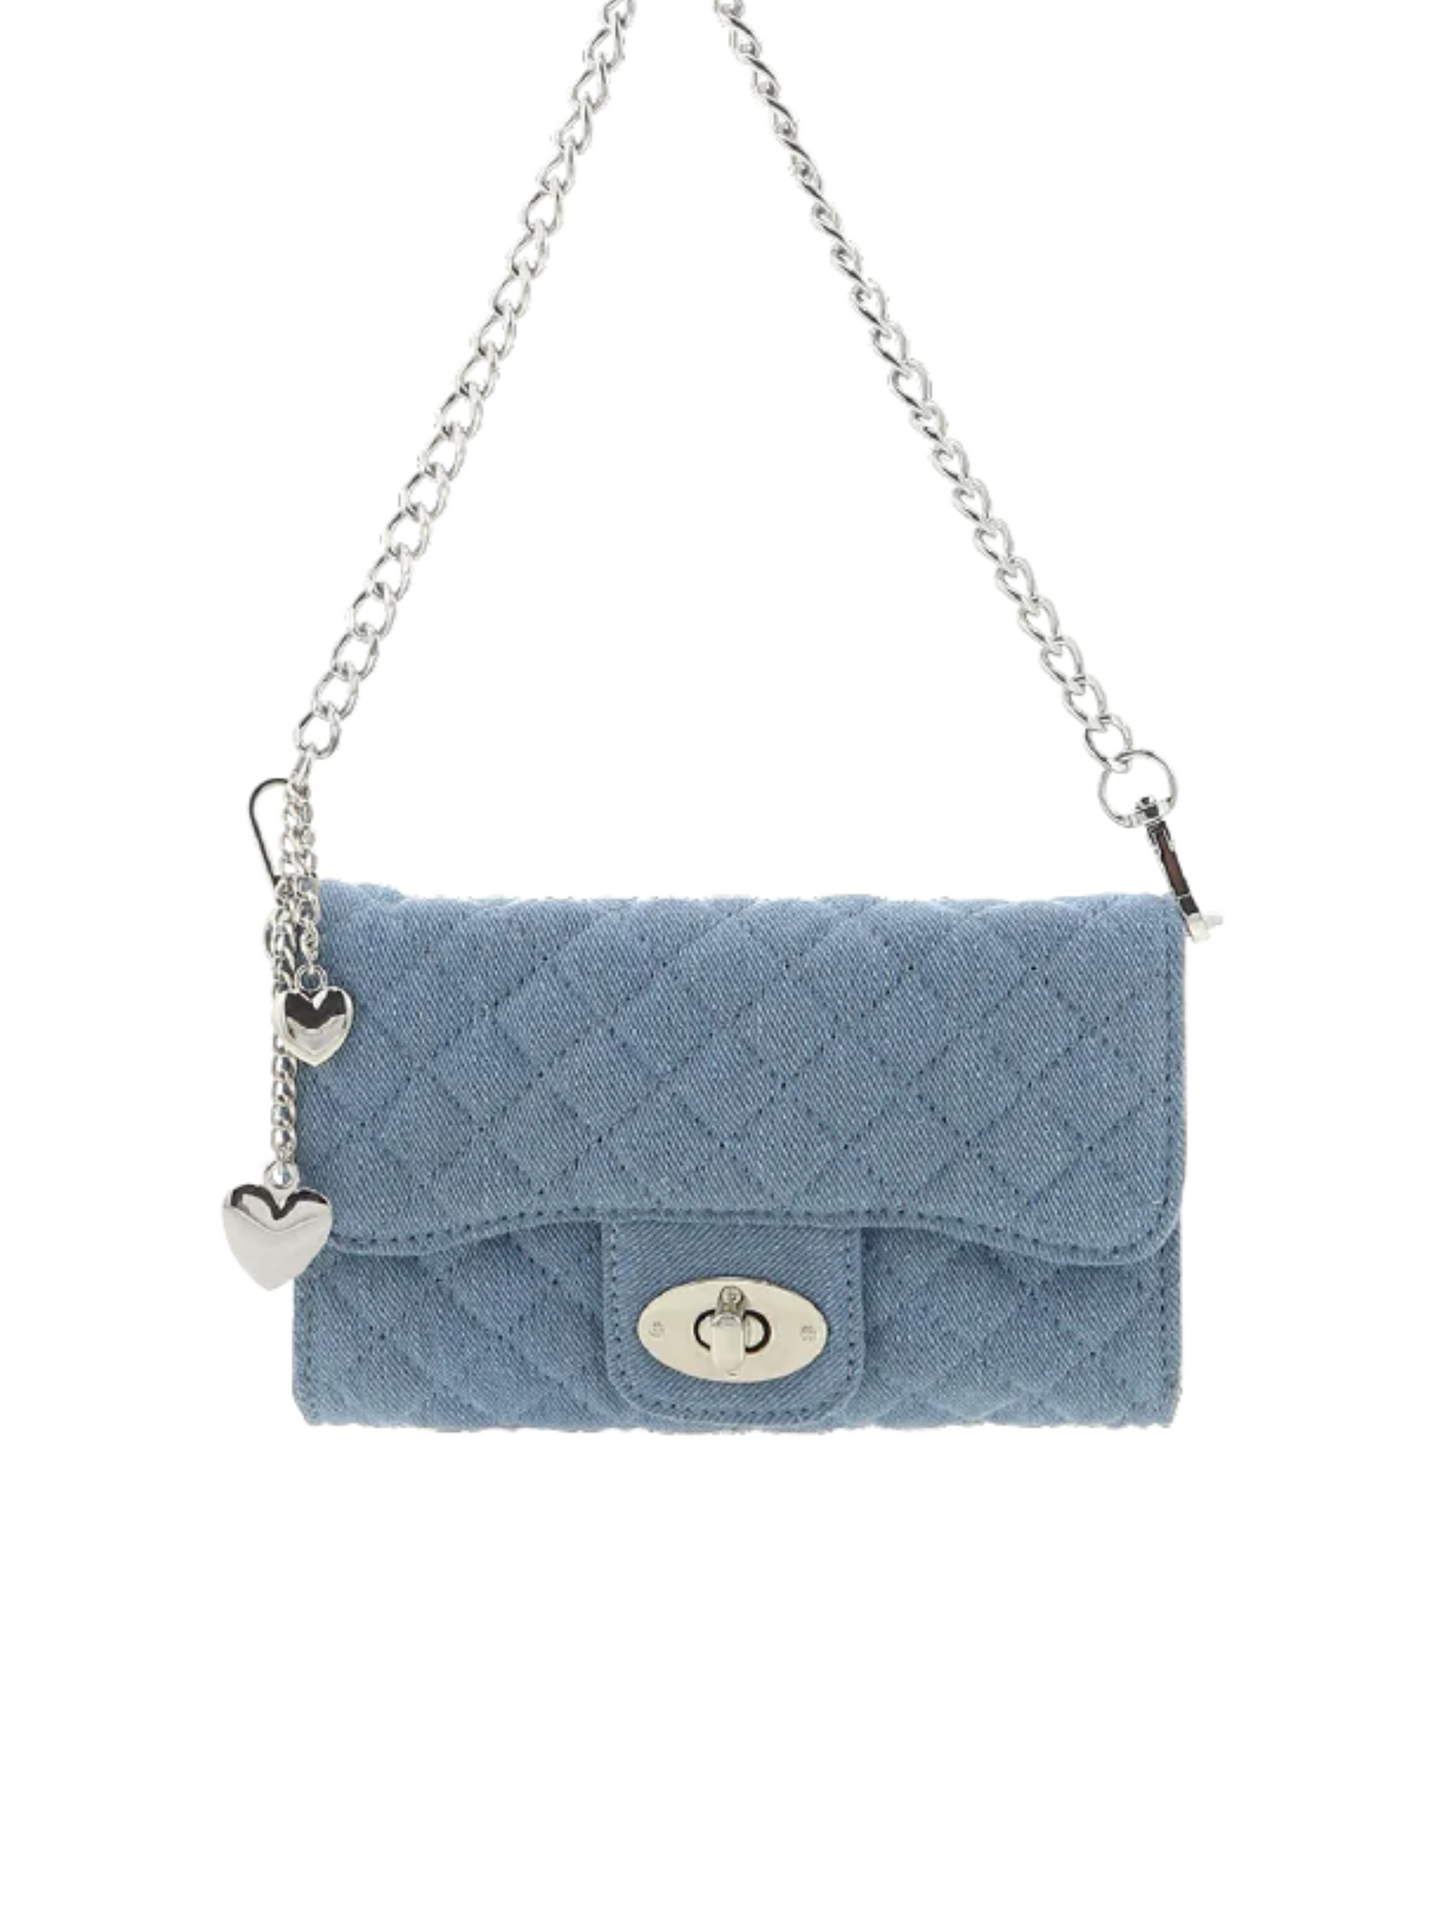 quilted denim crossbody purse with silver chain